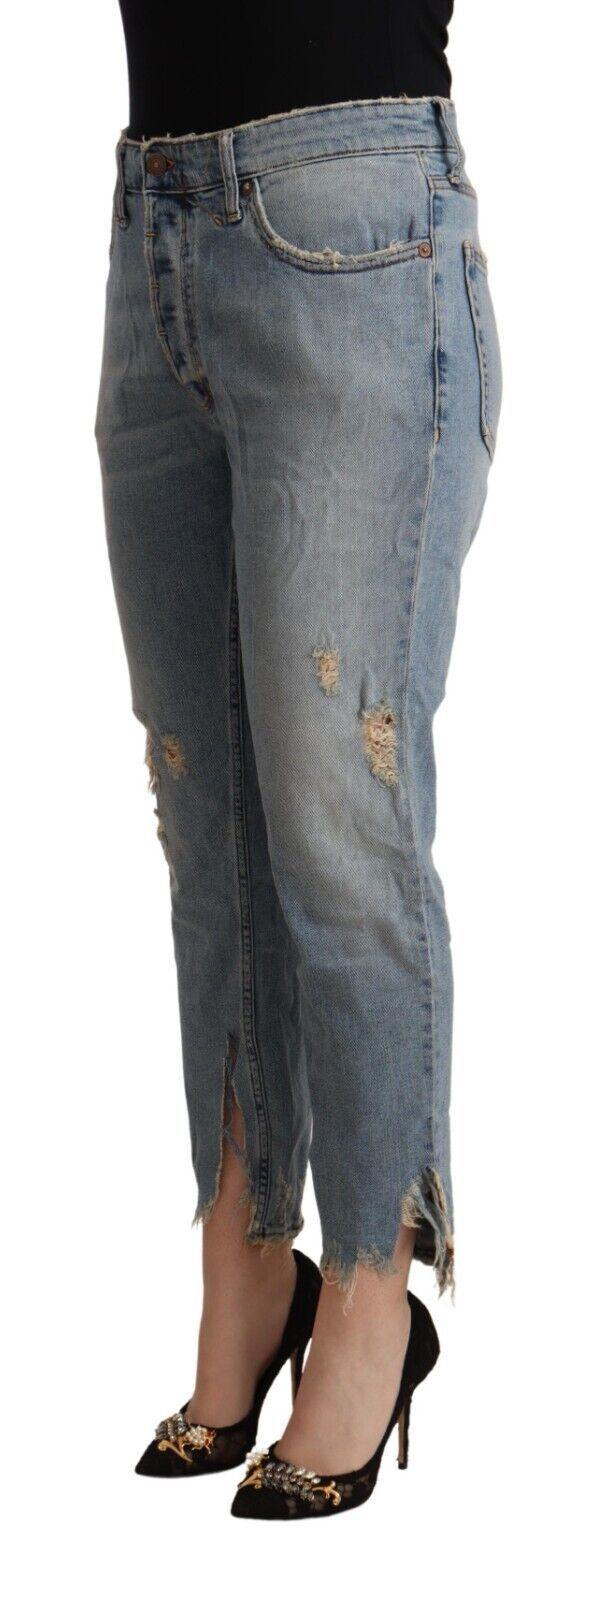 Cycle Women's Light Blue Distressed Mid Waist Cropped Denim Jeans - Designed by CYCLE Available to Buy at a Discounted Price on Moon Behind The Hill Online Designer Discount Store